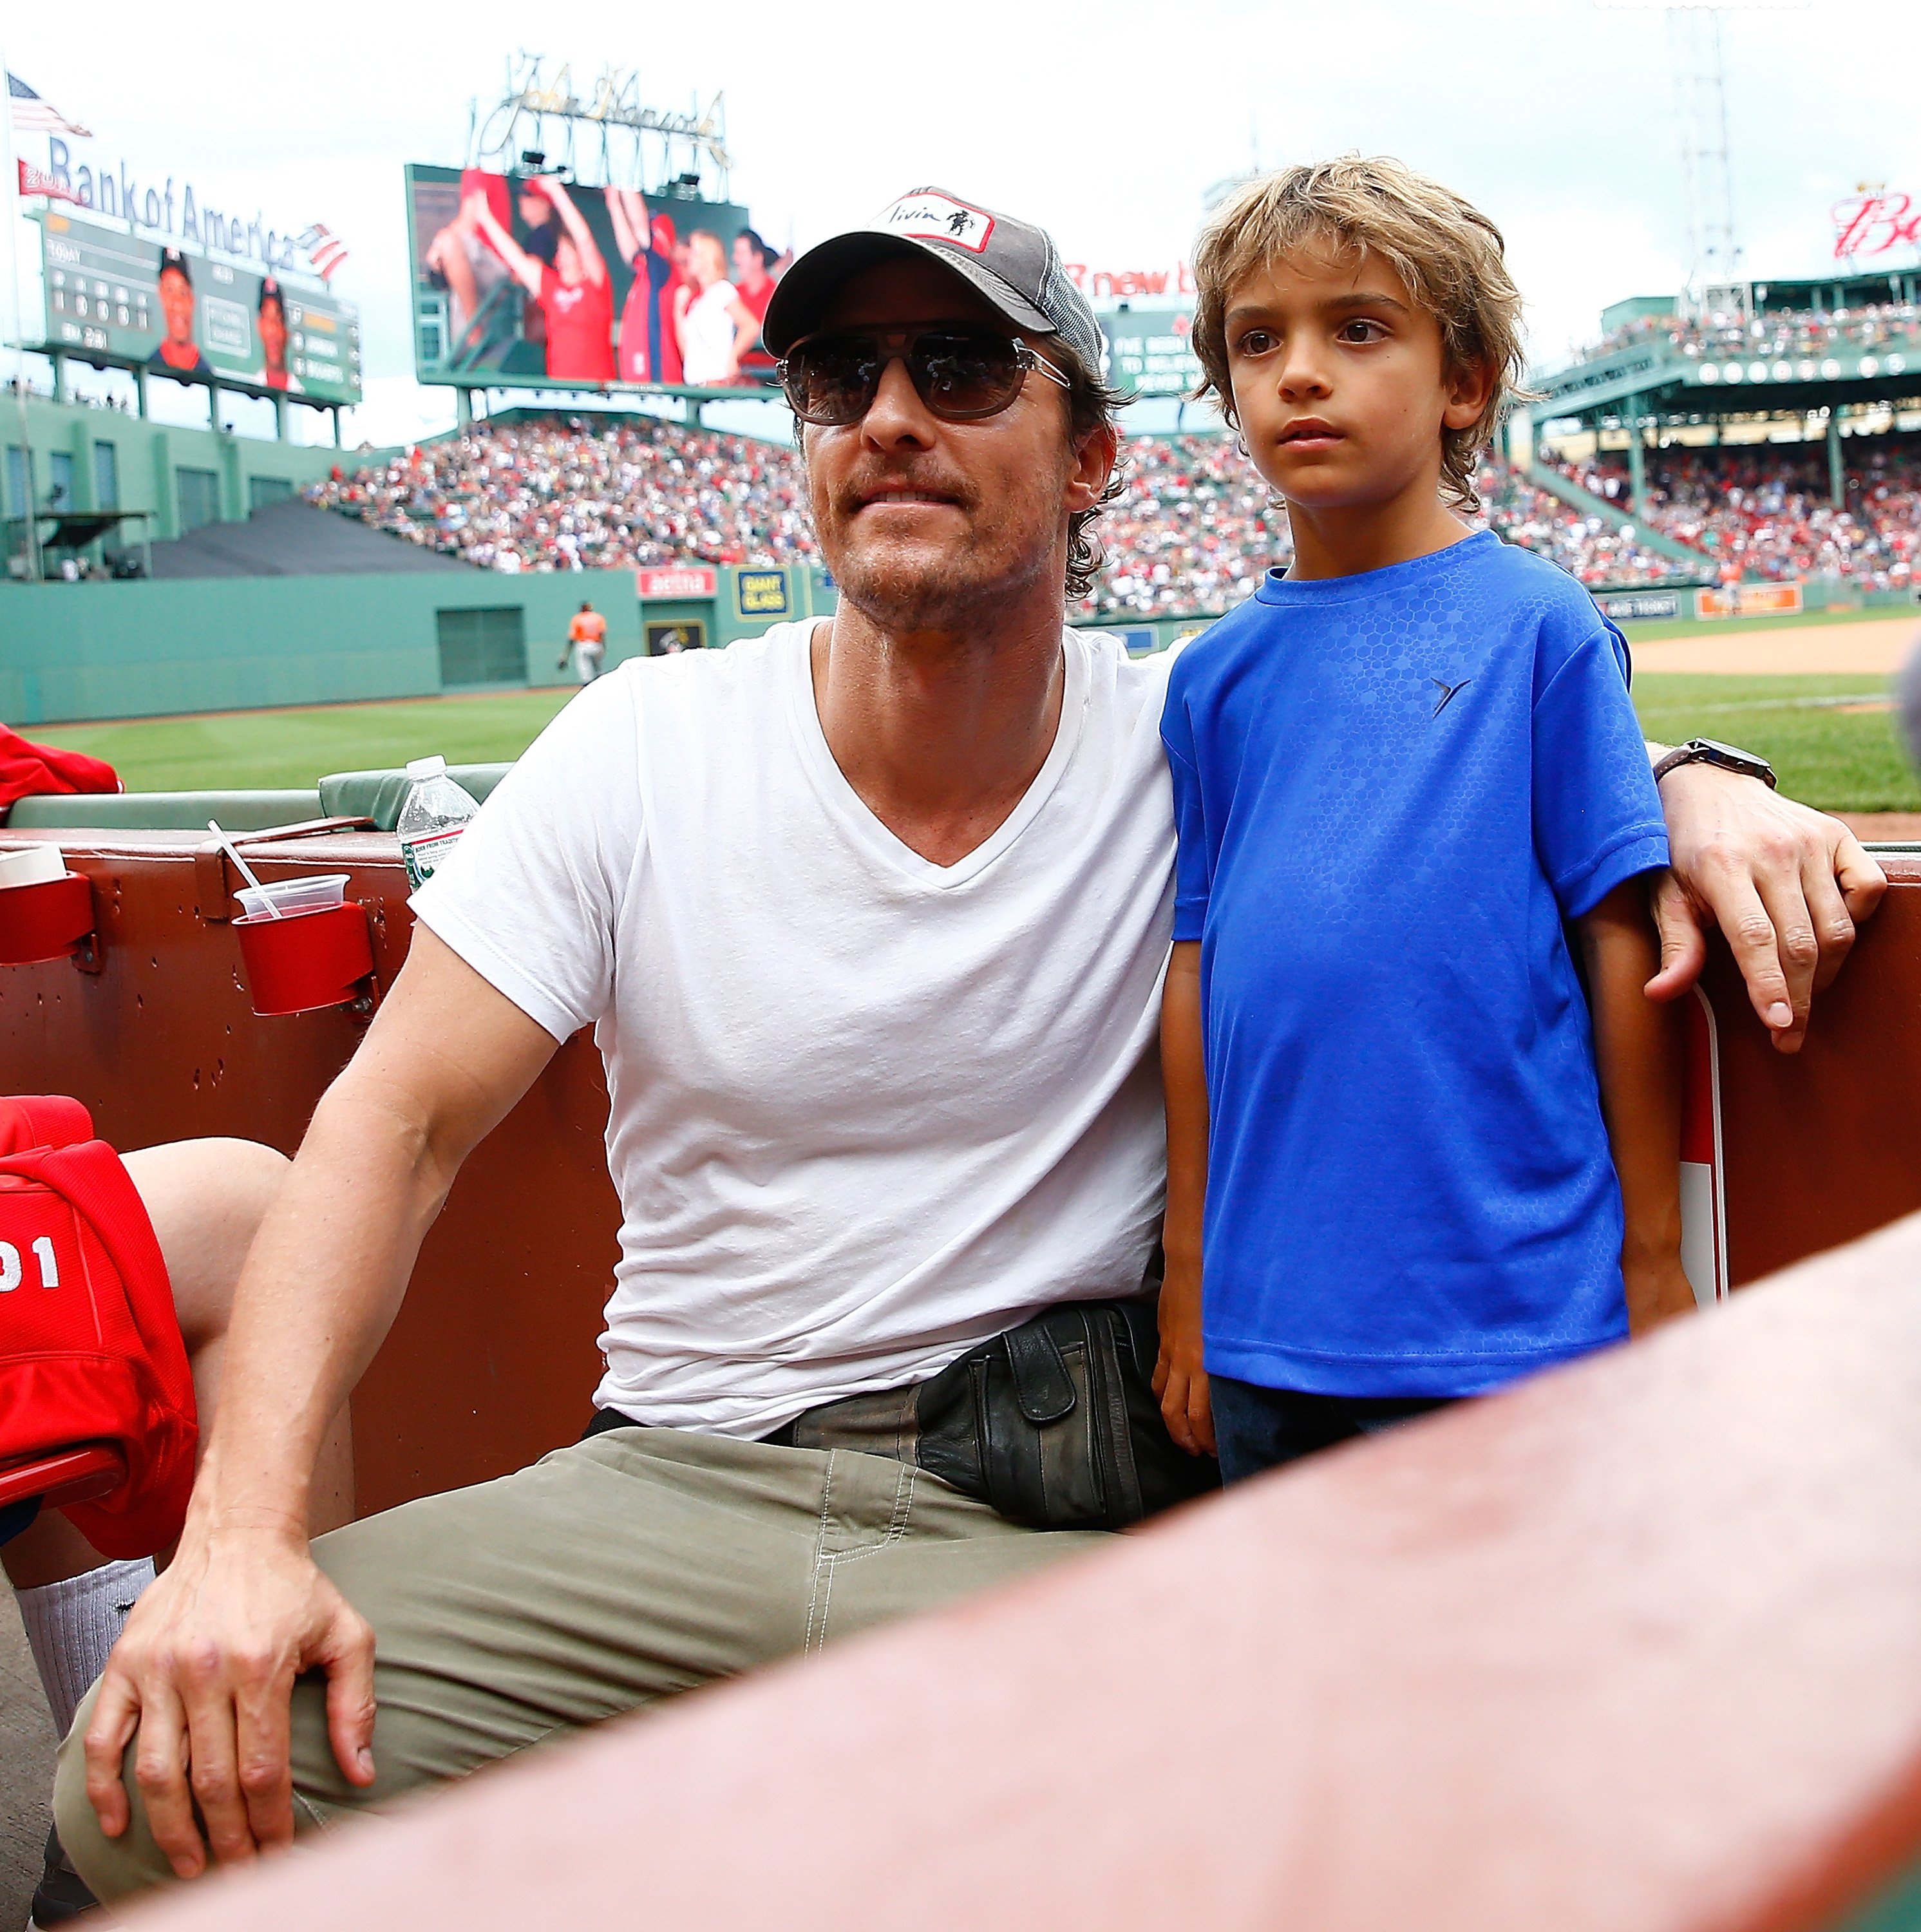 Actor Matthew McConaughey and his son Levi pose for a photo during the game between the Boston Red Sox and the Houston Astros during the game at Fenway Park on August 17, 2014  | Photo: Getty Images